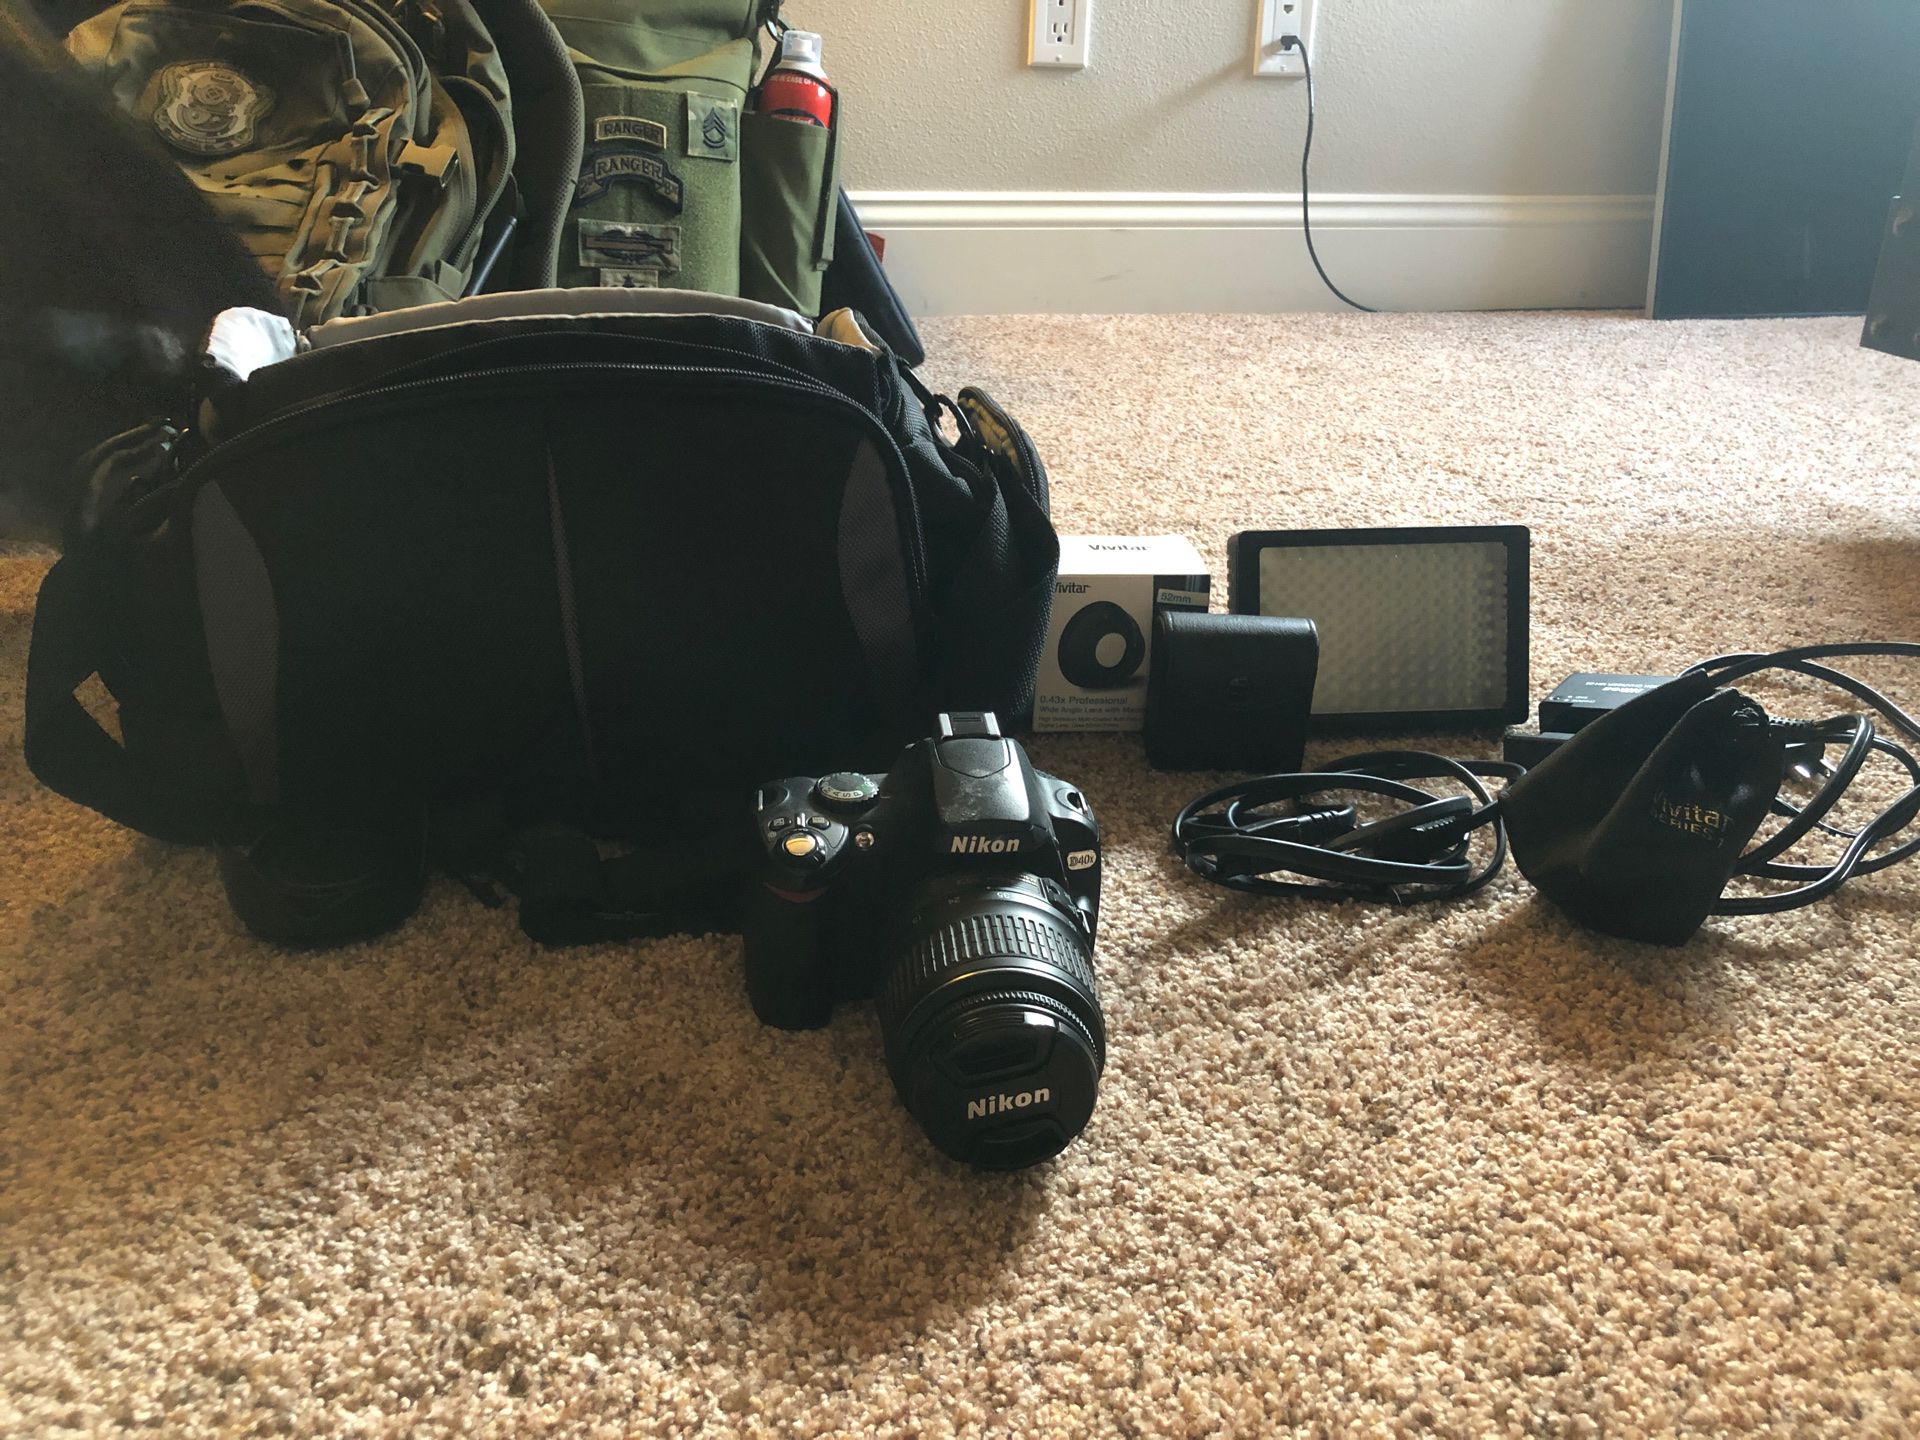 Nikon d40x camera with accessories, extra lenses, and carrying case